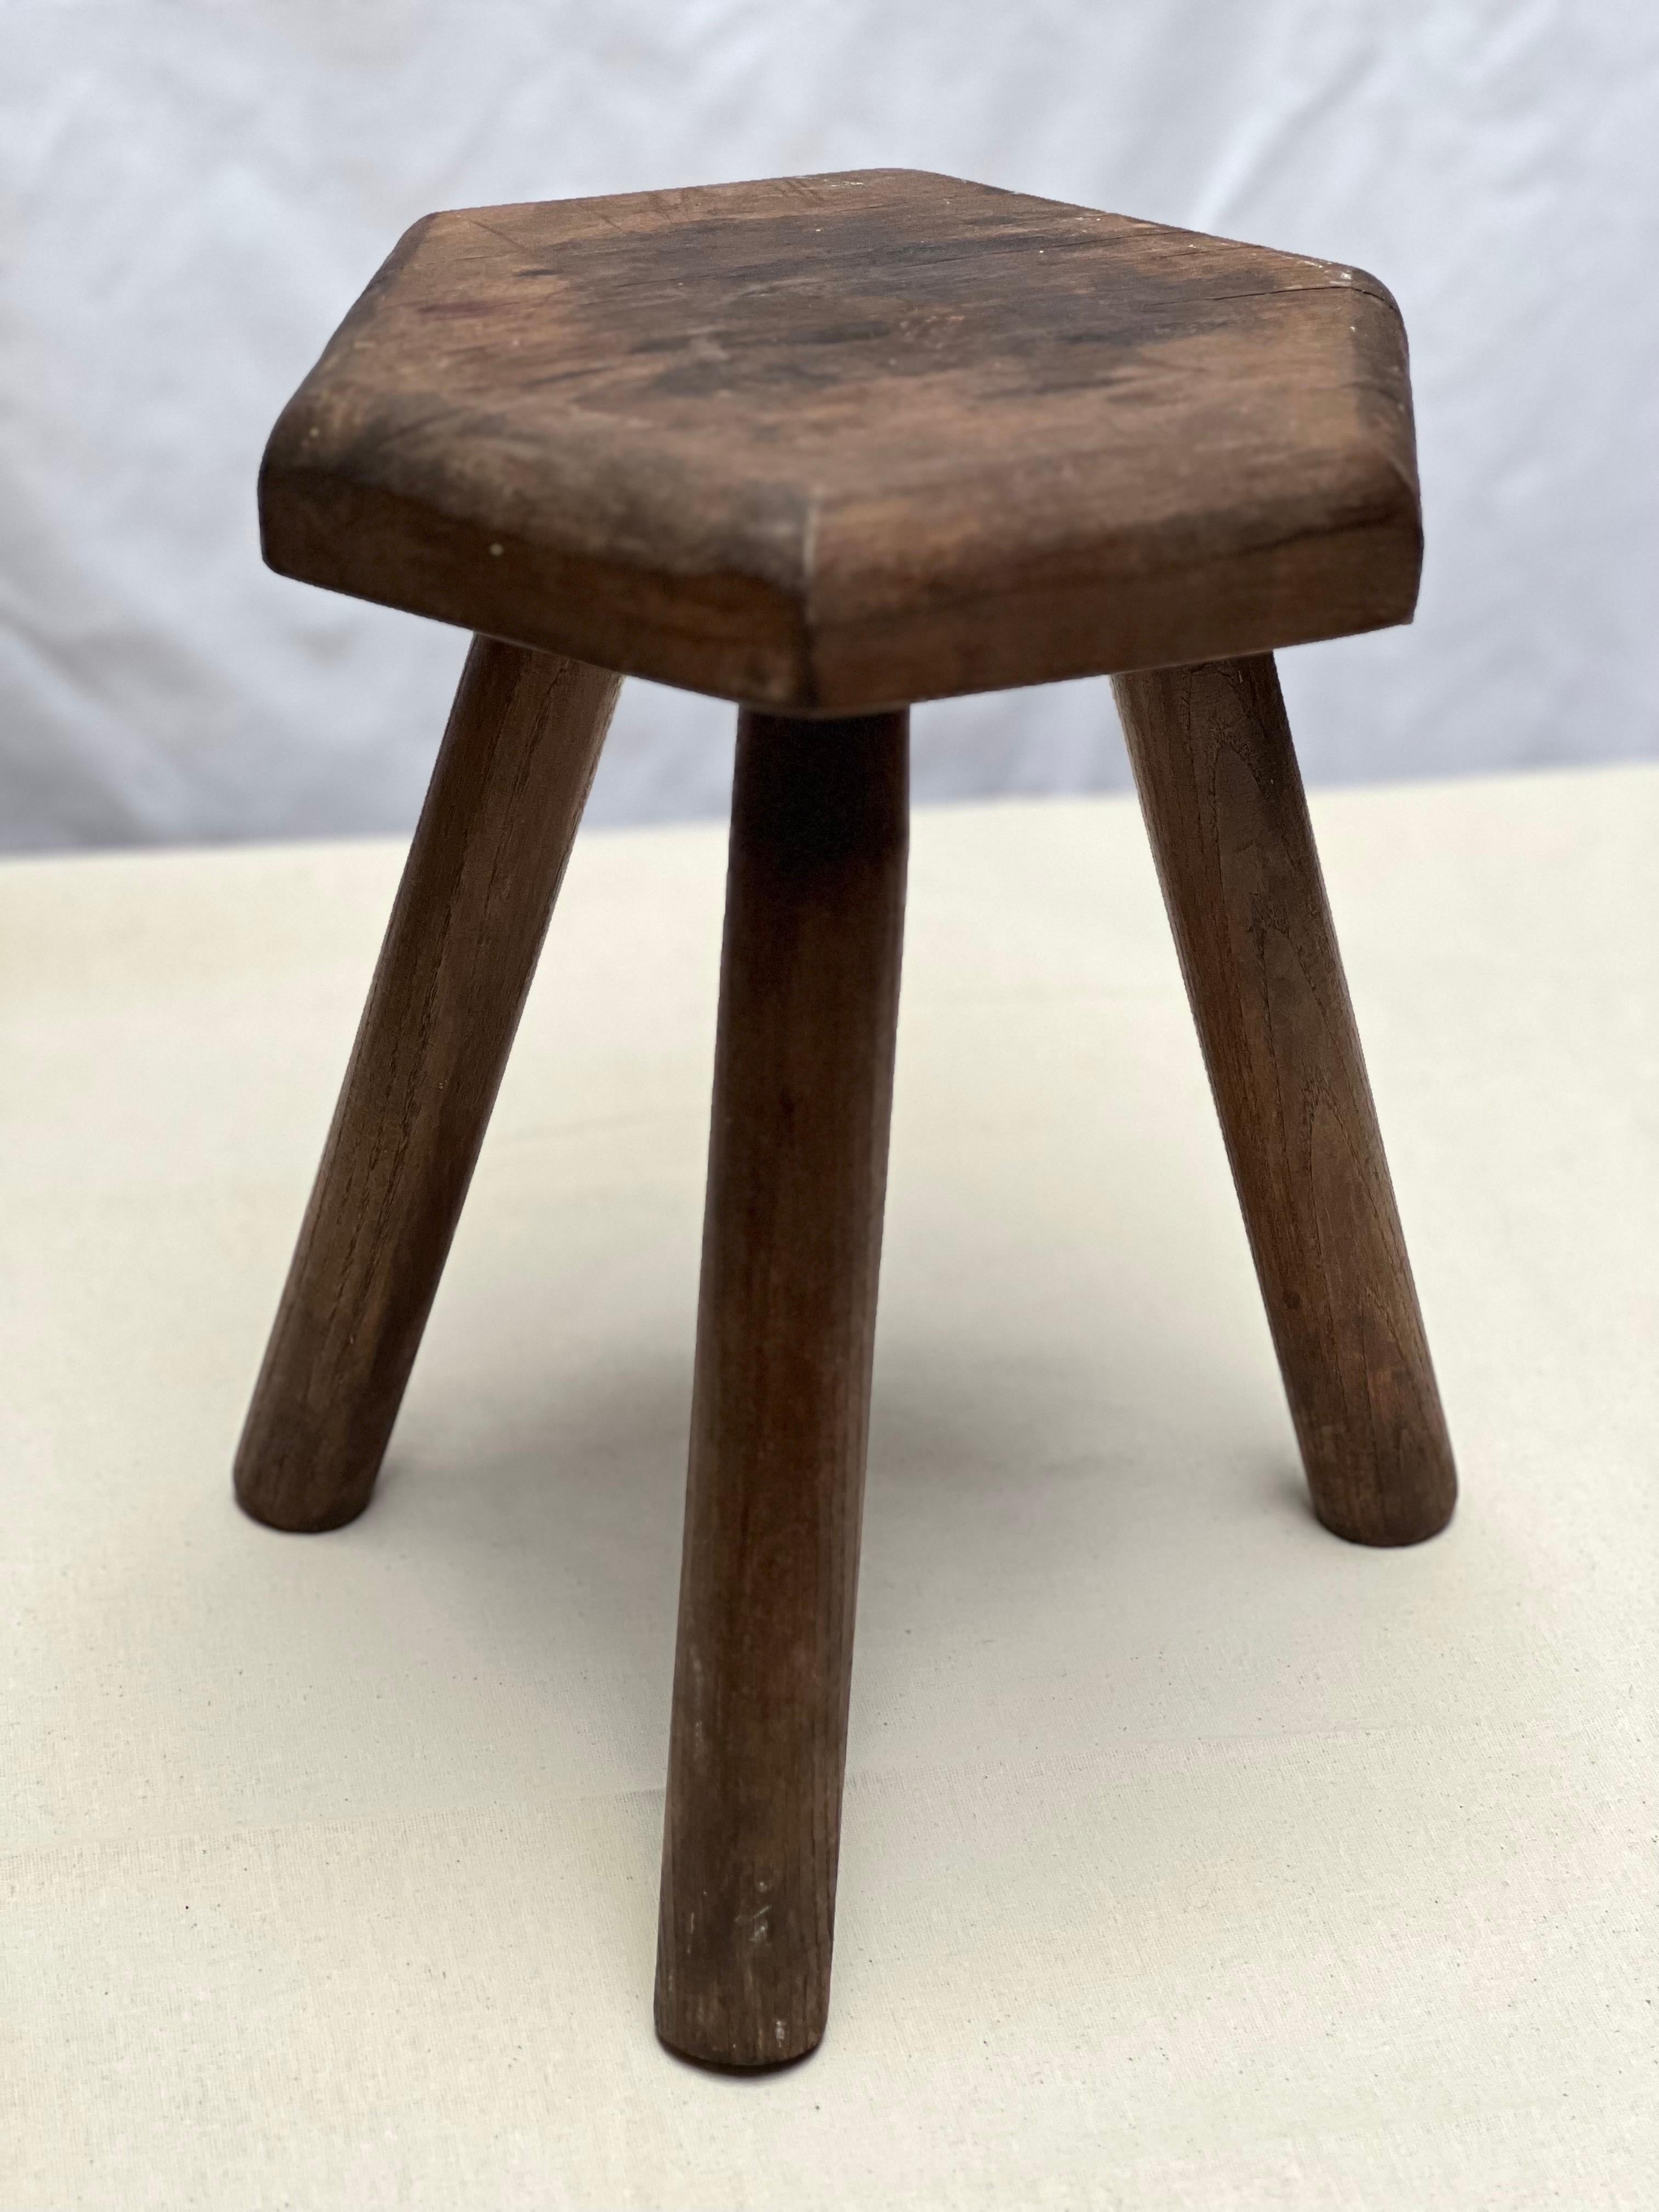 Hand-Crafted French Stained Wooden Stool circa 1940 Brutalist Decorative elements